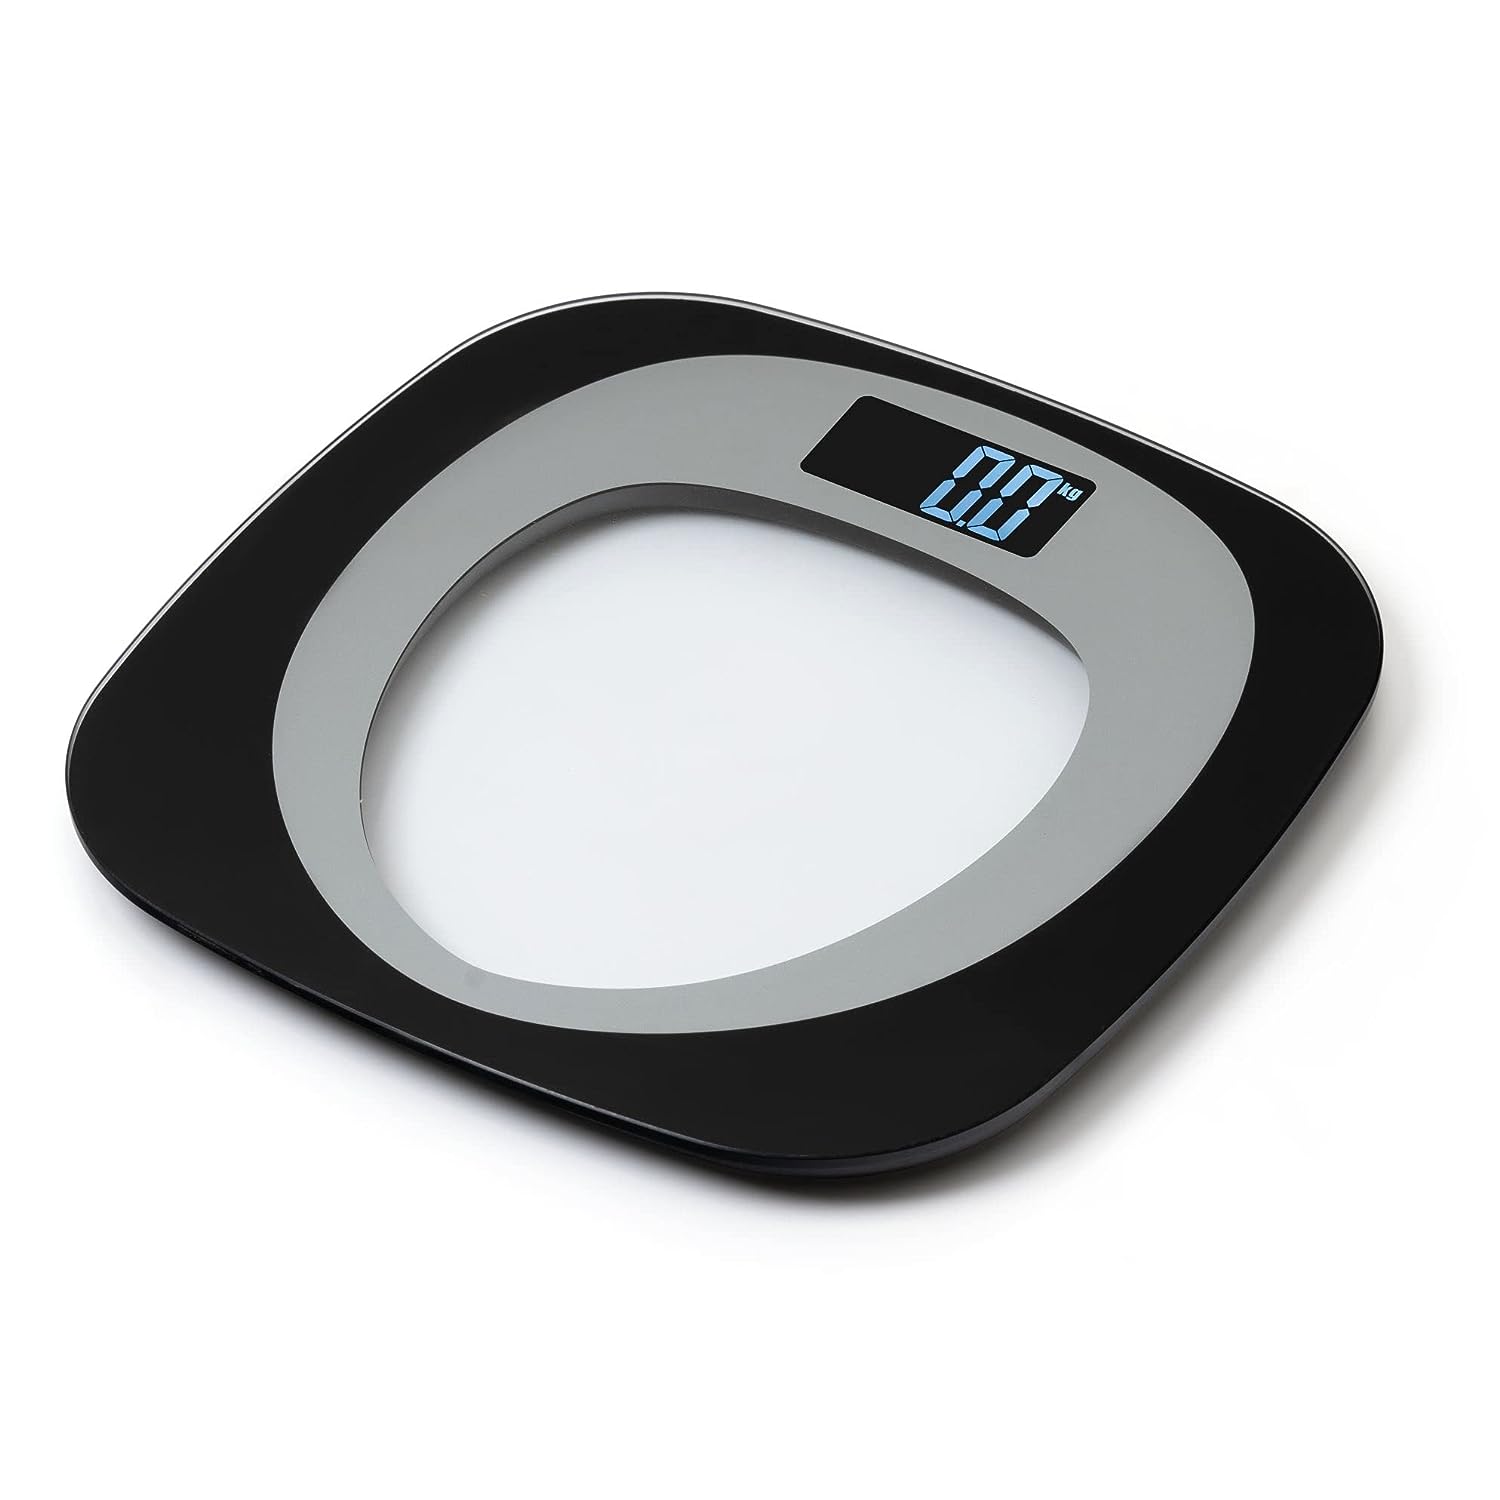 Hoffen India HO 29 Electronic Digital Weight Machine for Body Weight Weighing Scale Battery Included, 2 Years Warranty